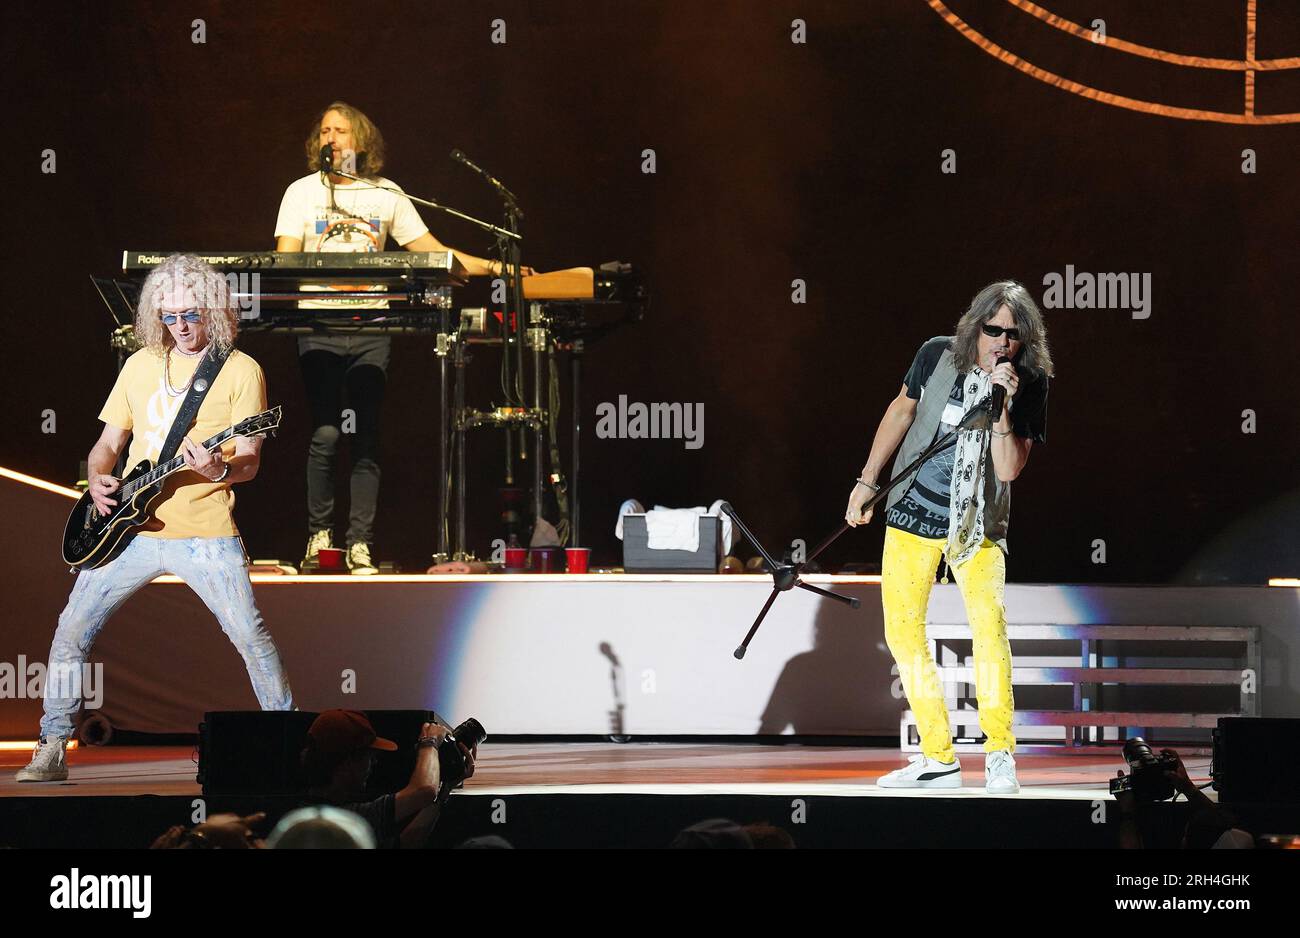 Dallas, United States. 11th Aug, 2023. August 11, 2023, Dallas, Texas, United States: Kelly Hansen and Bruce Watson, Members of the American rock band Foreigner perform on stage as part of their The Historic Farewell Tour at the Dos Equis Pavilion on Friday August 11, 2023 in Dallas, Texas, United States. (Photo by Javier Vicencio/Eyepix Group) Credit: Eyepix Group/Alamy Live News Stock Photo